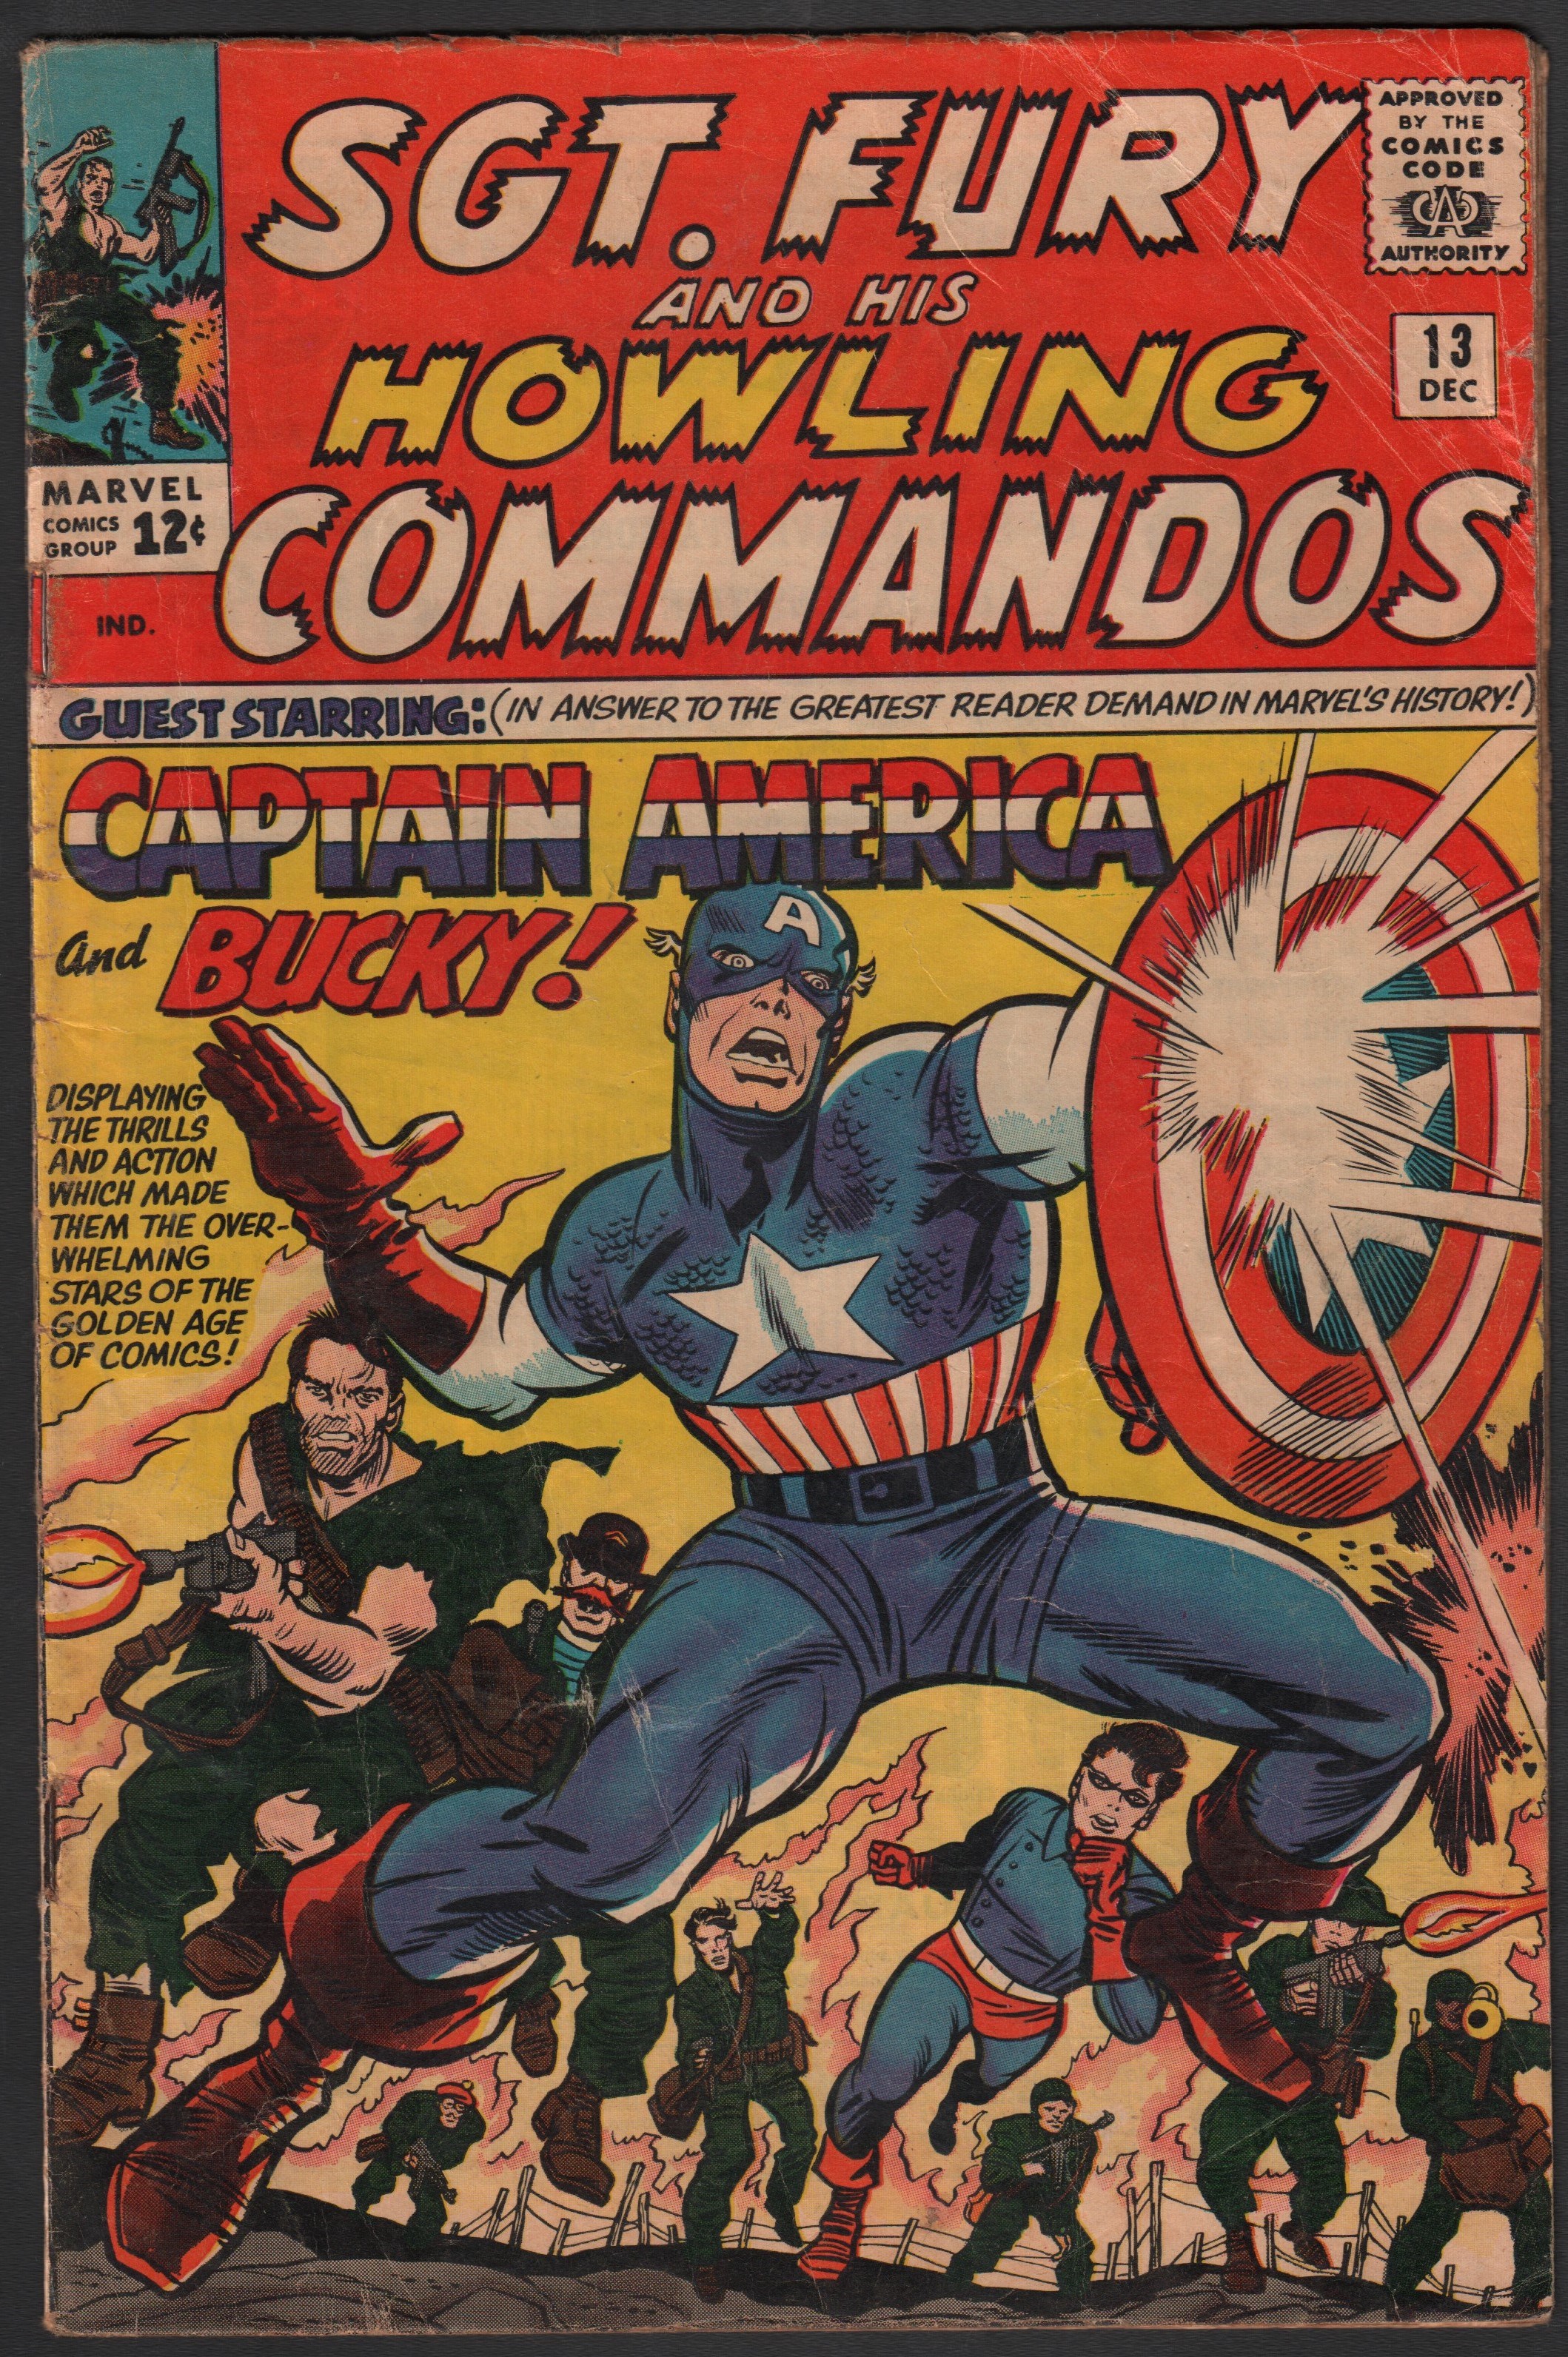 Comics - 1964 Sgt. Fury and His Howling Commando's #13